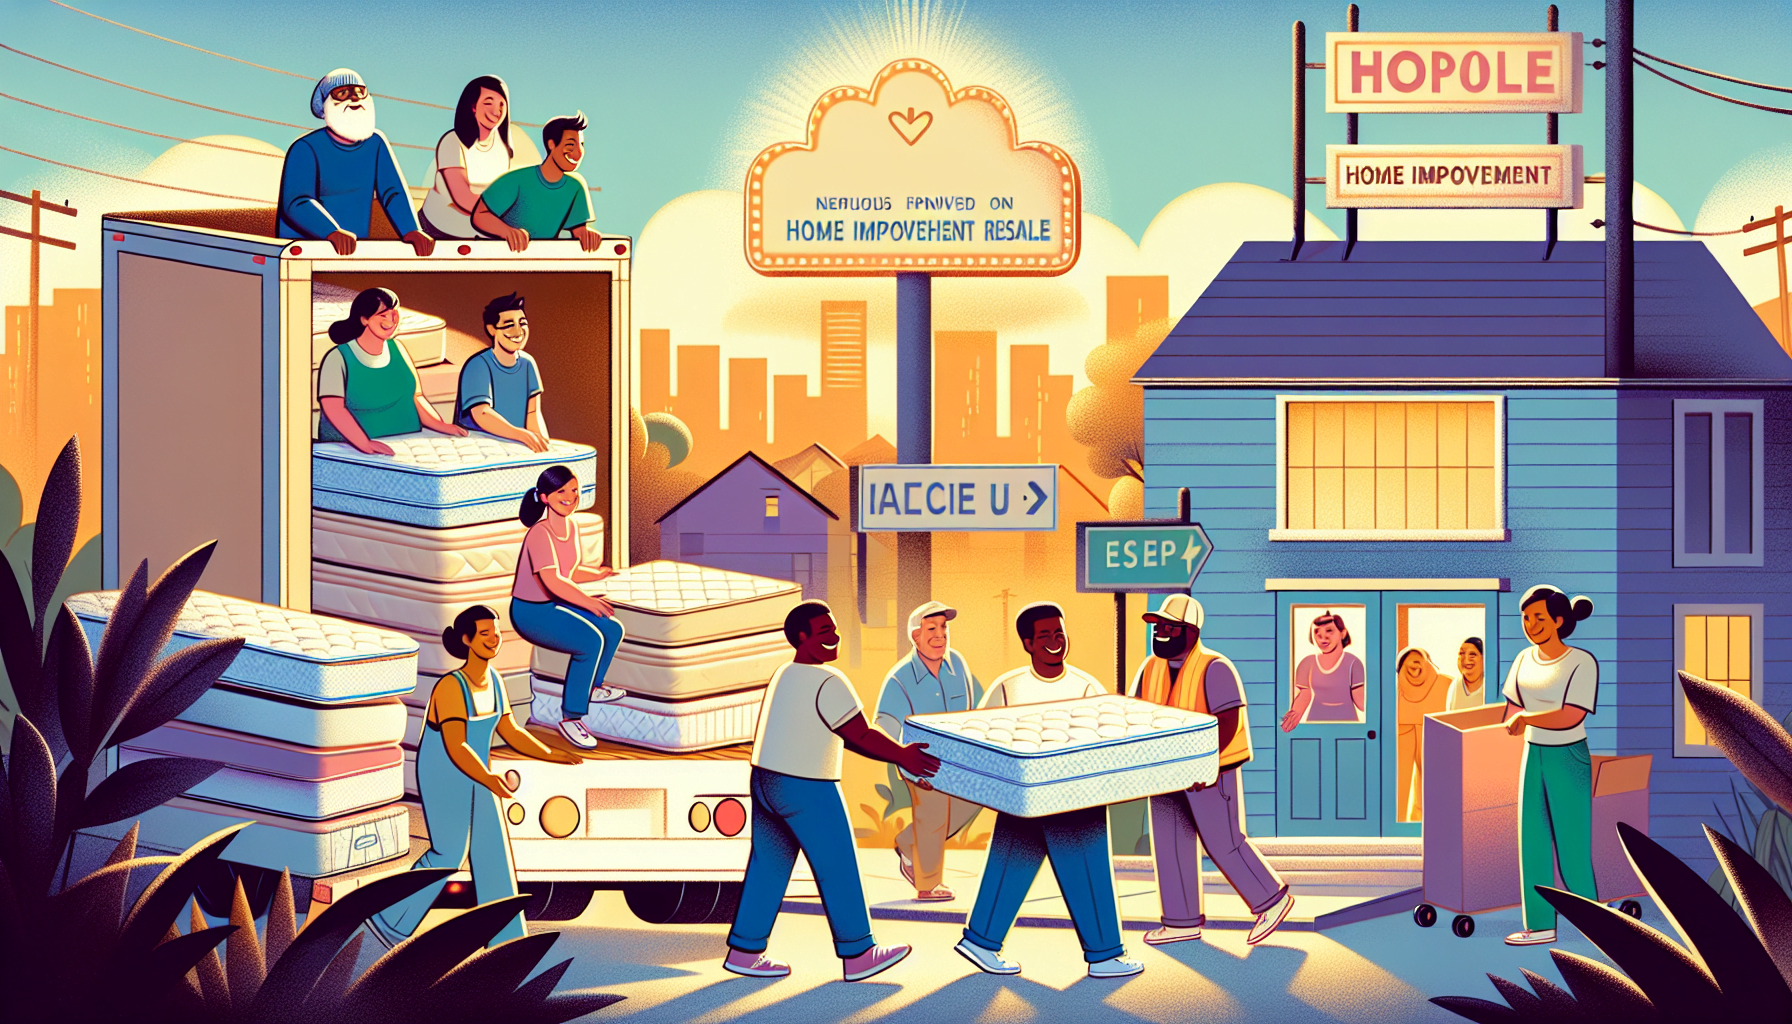 Illustration of donating old mattress to local charities in Austin